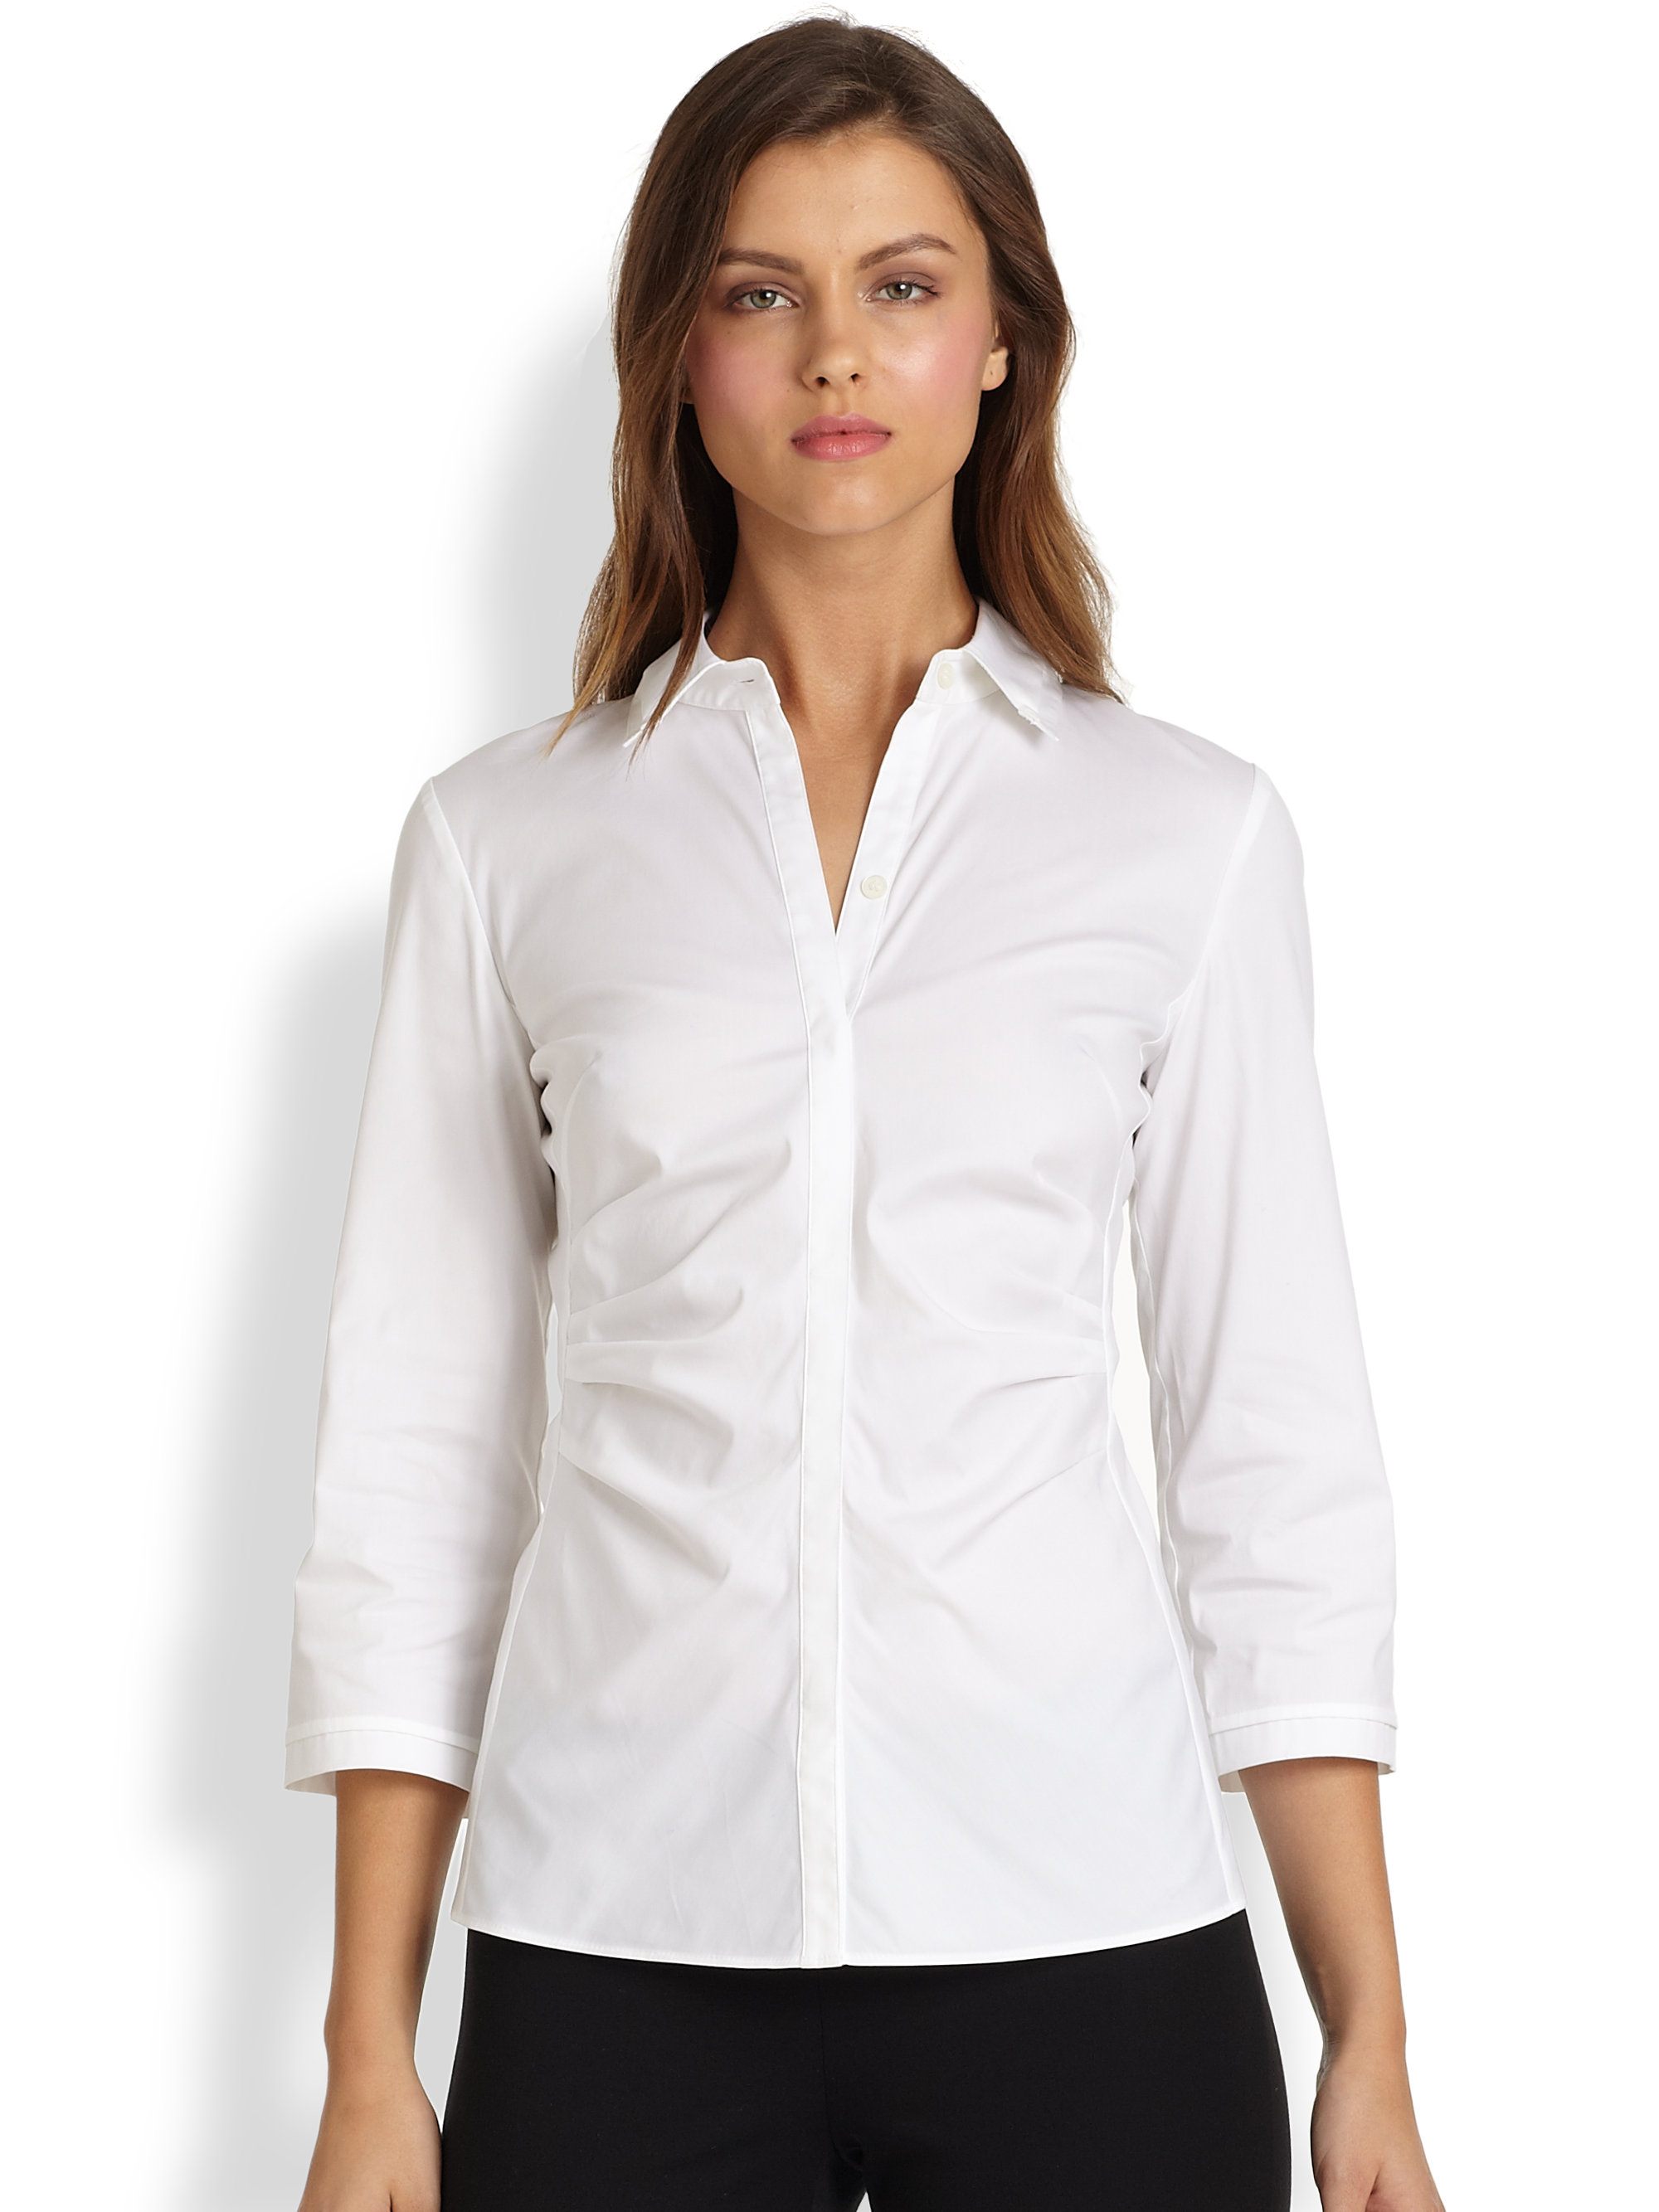 Lafayette 148 New York Italian Stretch Cotton Leigh Blouse in White - Lyst